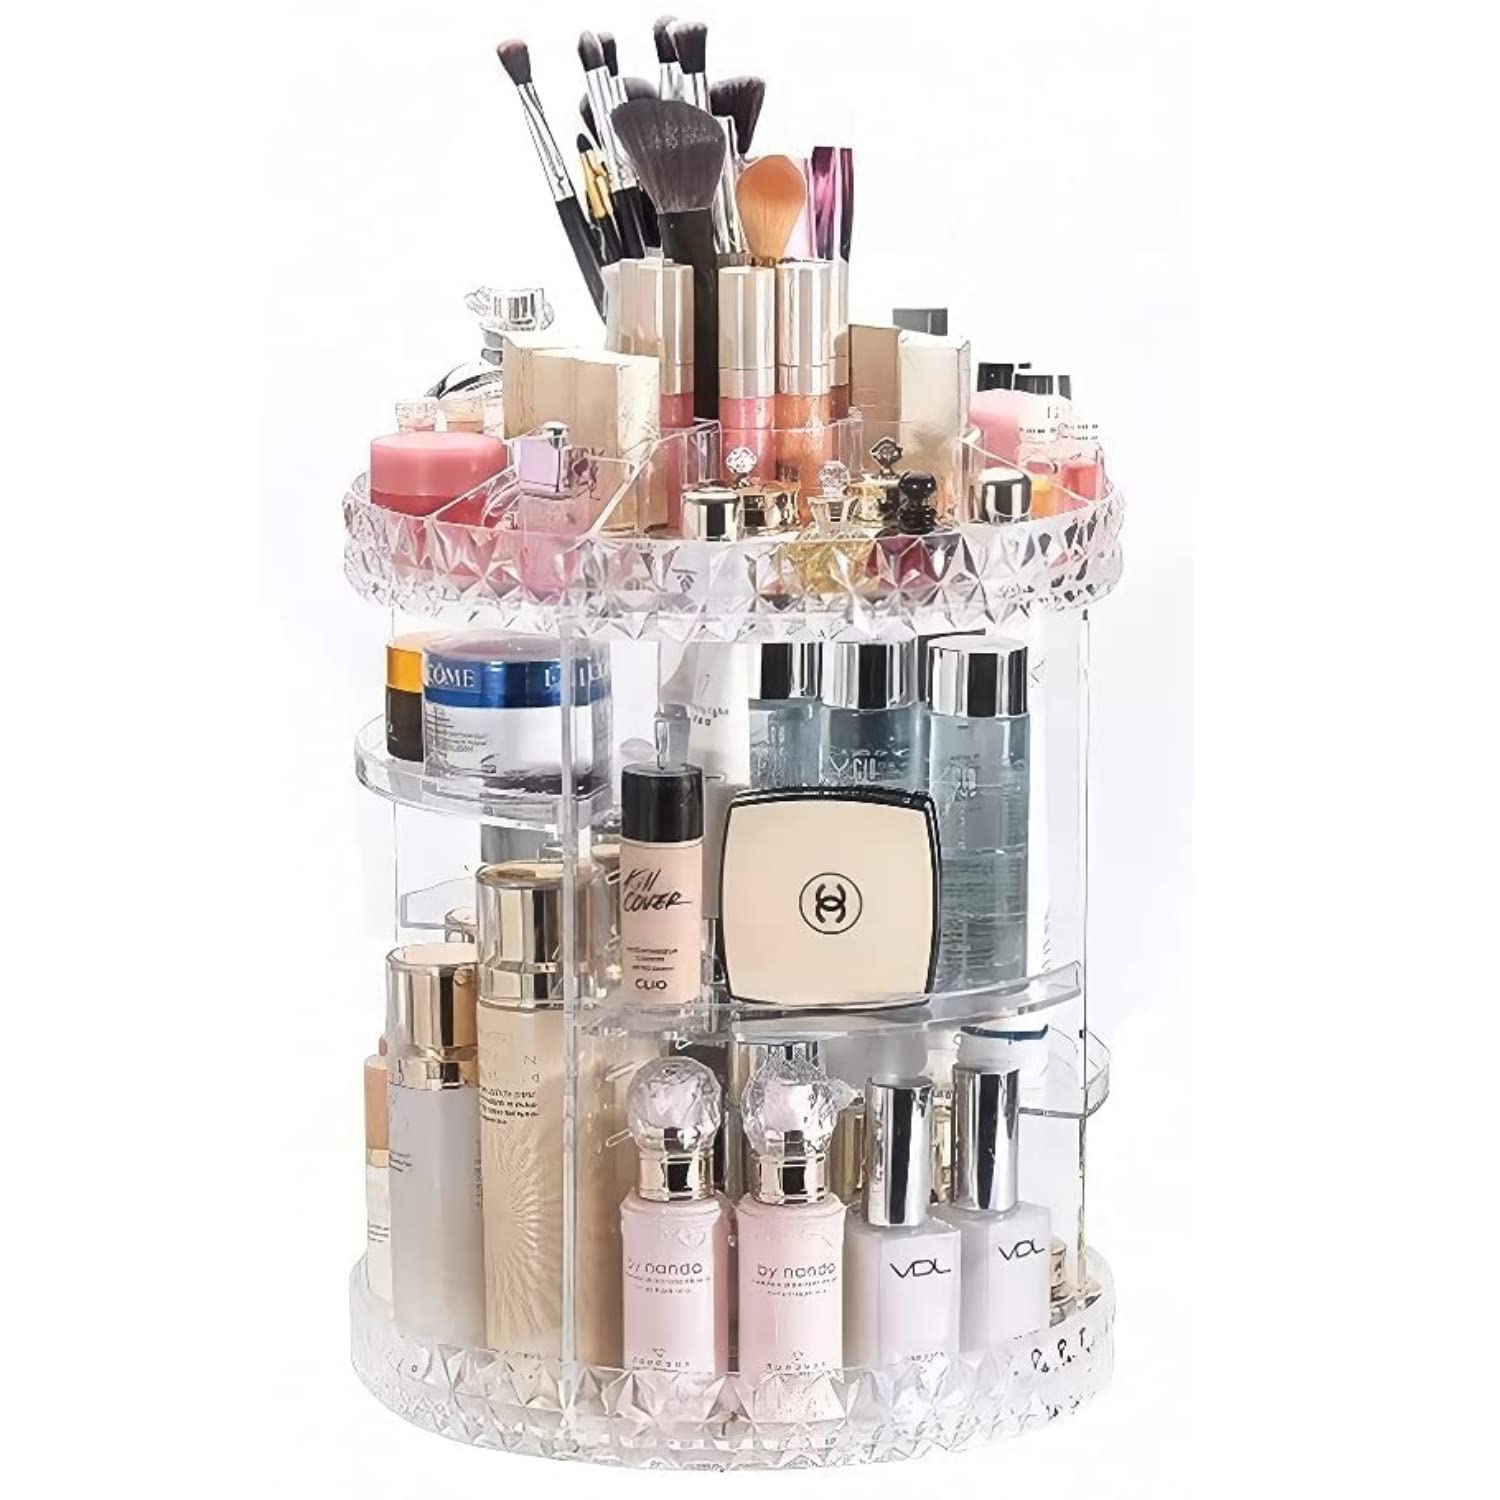 VIO 360°Rotating Cosmetic Makeup Storage Holder Organizer Adjustable, Storage Display Cases with 6 Layers, Fits Most Cosmetics, Jewelry, Makeup Brushes, Lipsticks